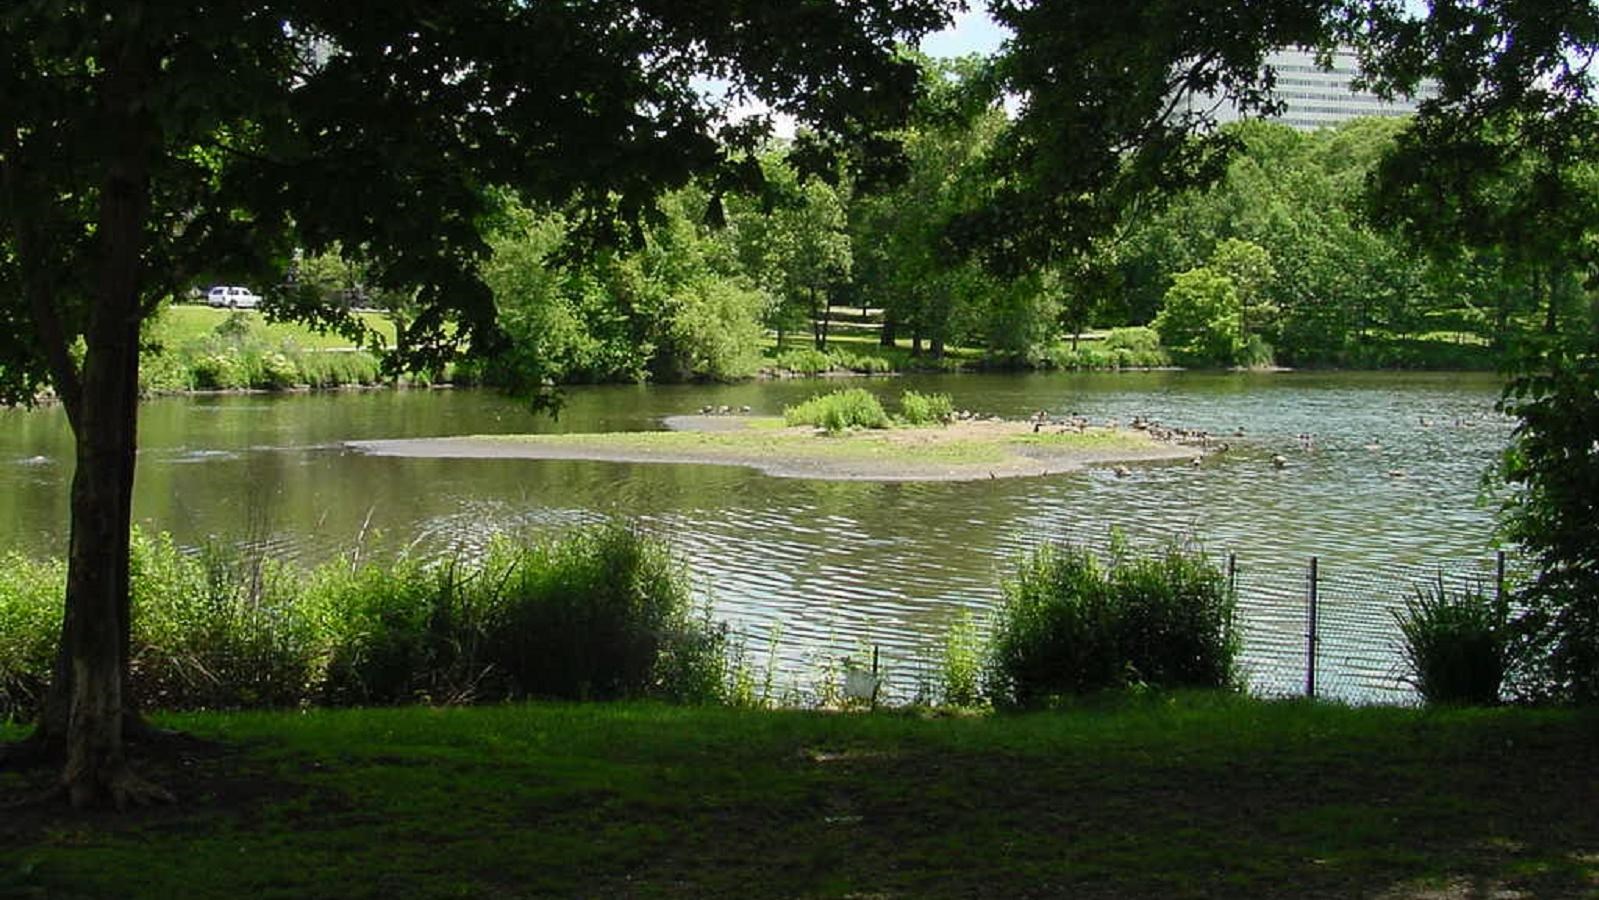 Body of water with trees and shrubs around it, with small island in the center